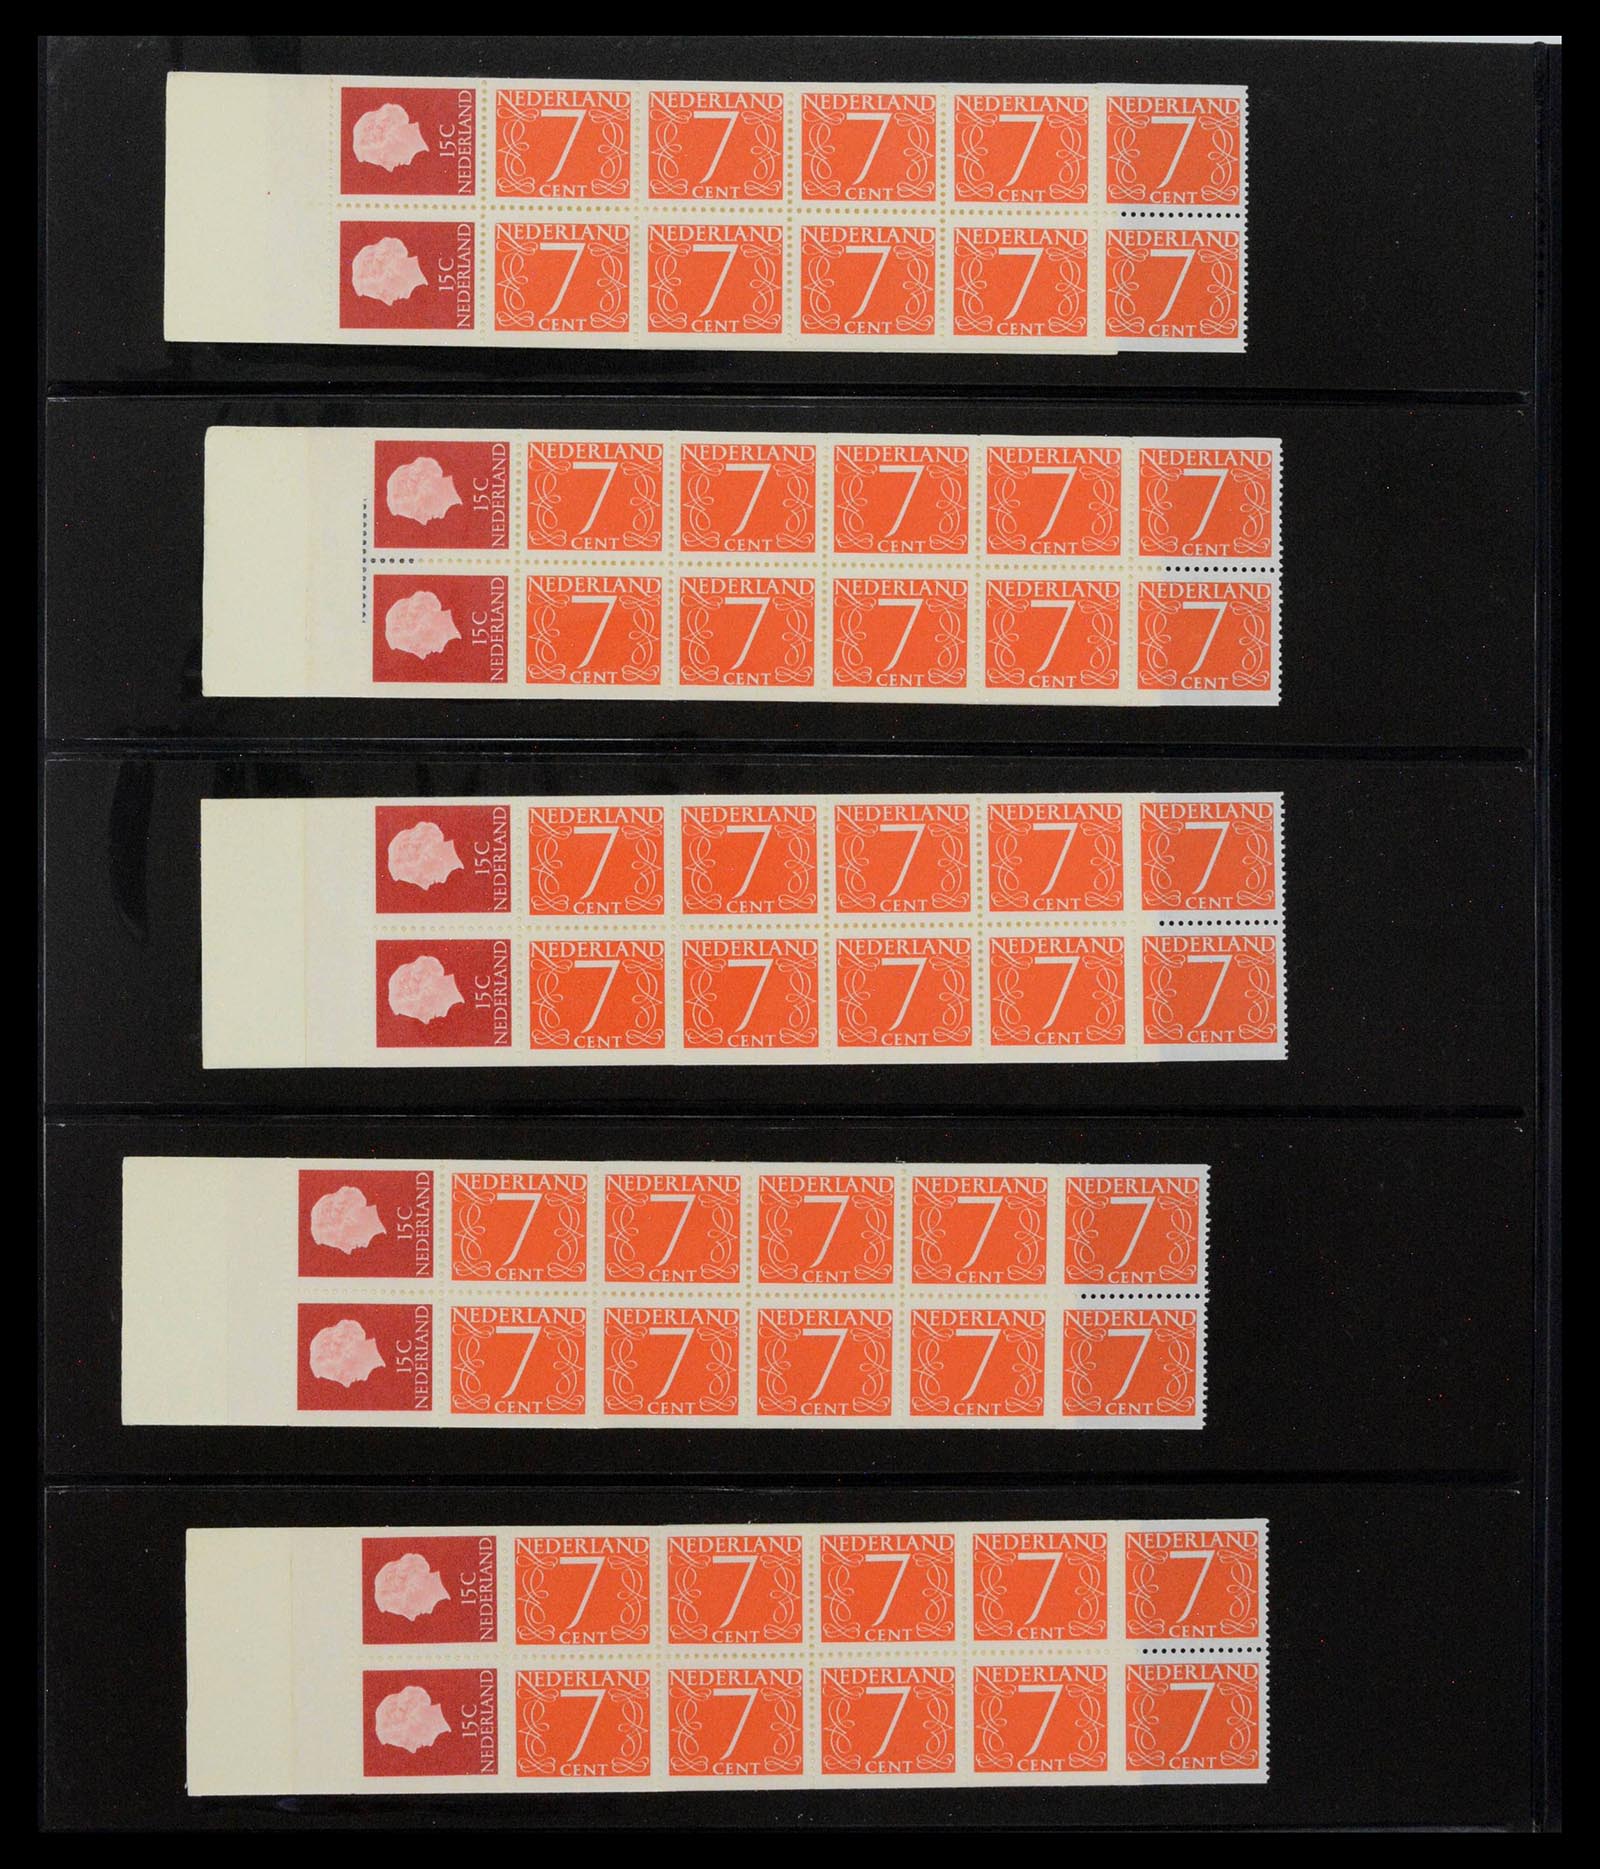 39034 0004 - Stamp collection 39034 Netherlands 1964-1976.